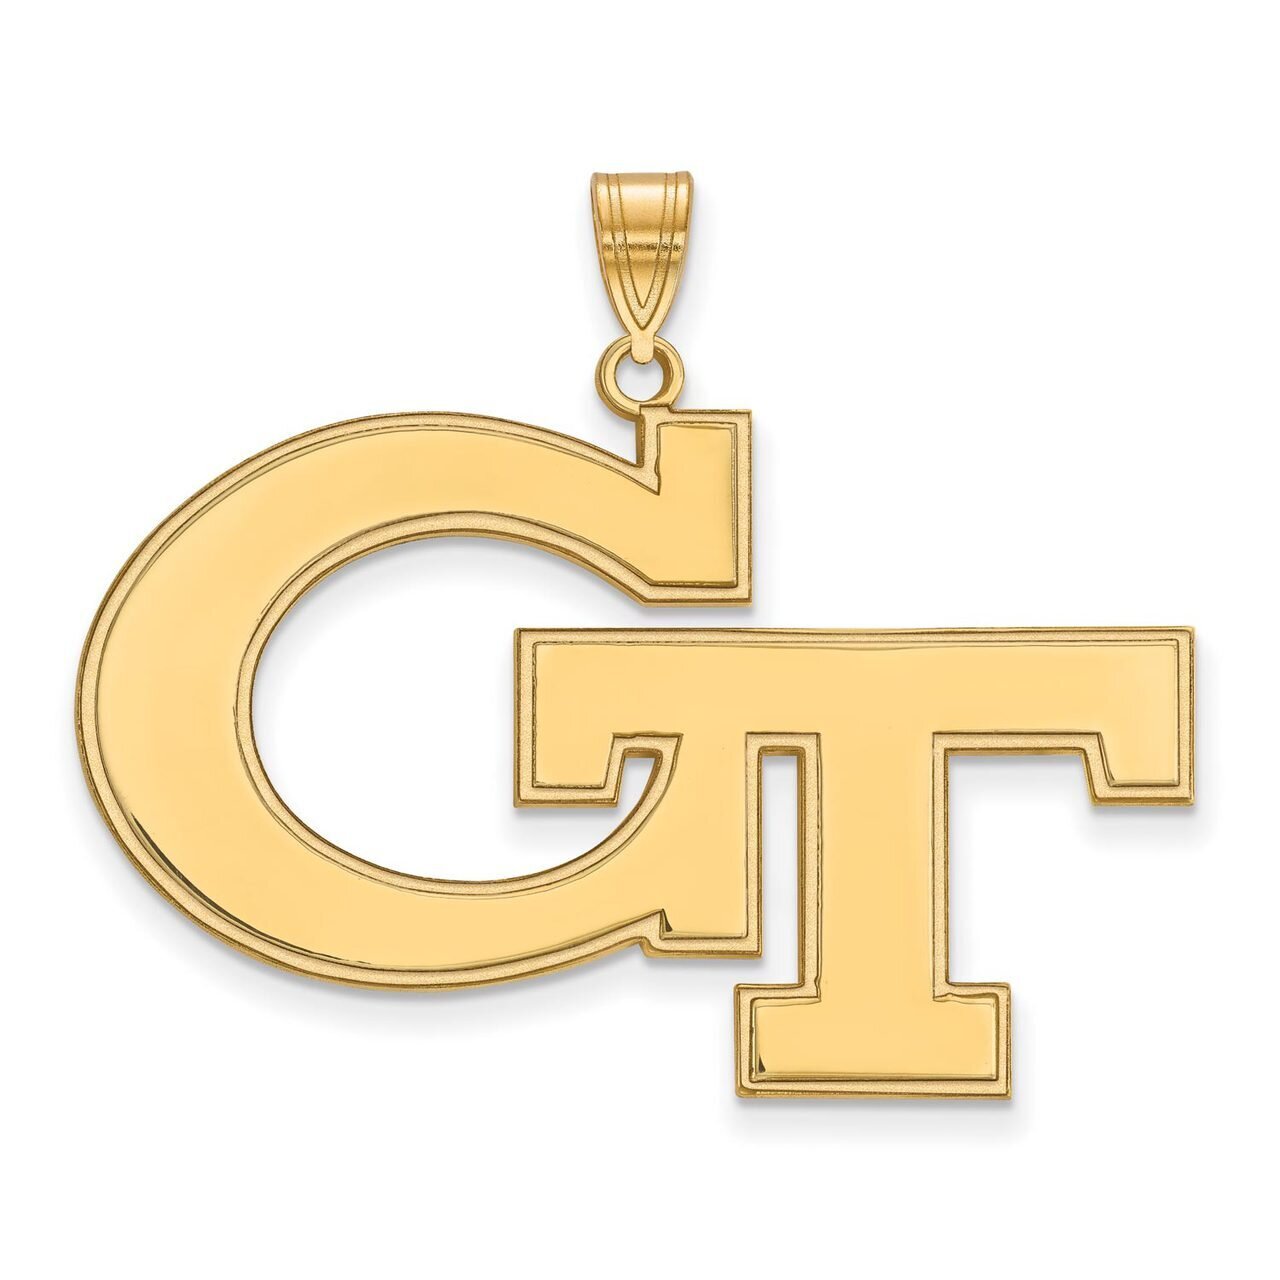 Georgia Institute of Technology x-Large Pendant 14k Yellow Gold 4Y005GT